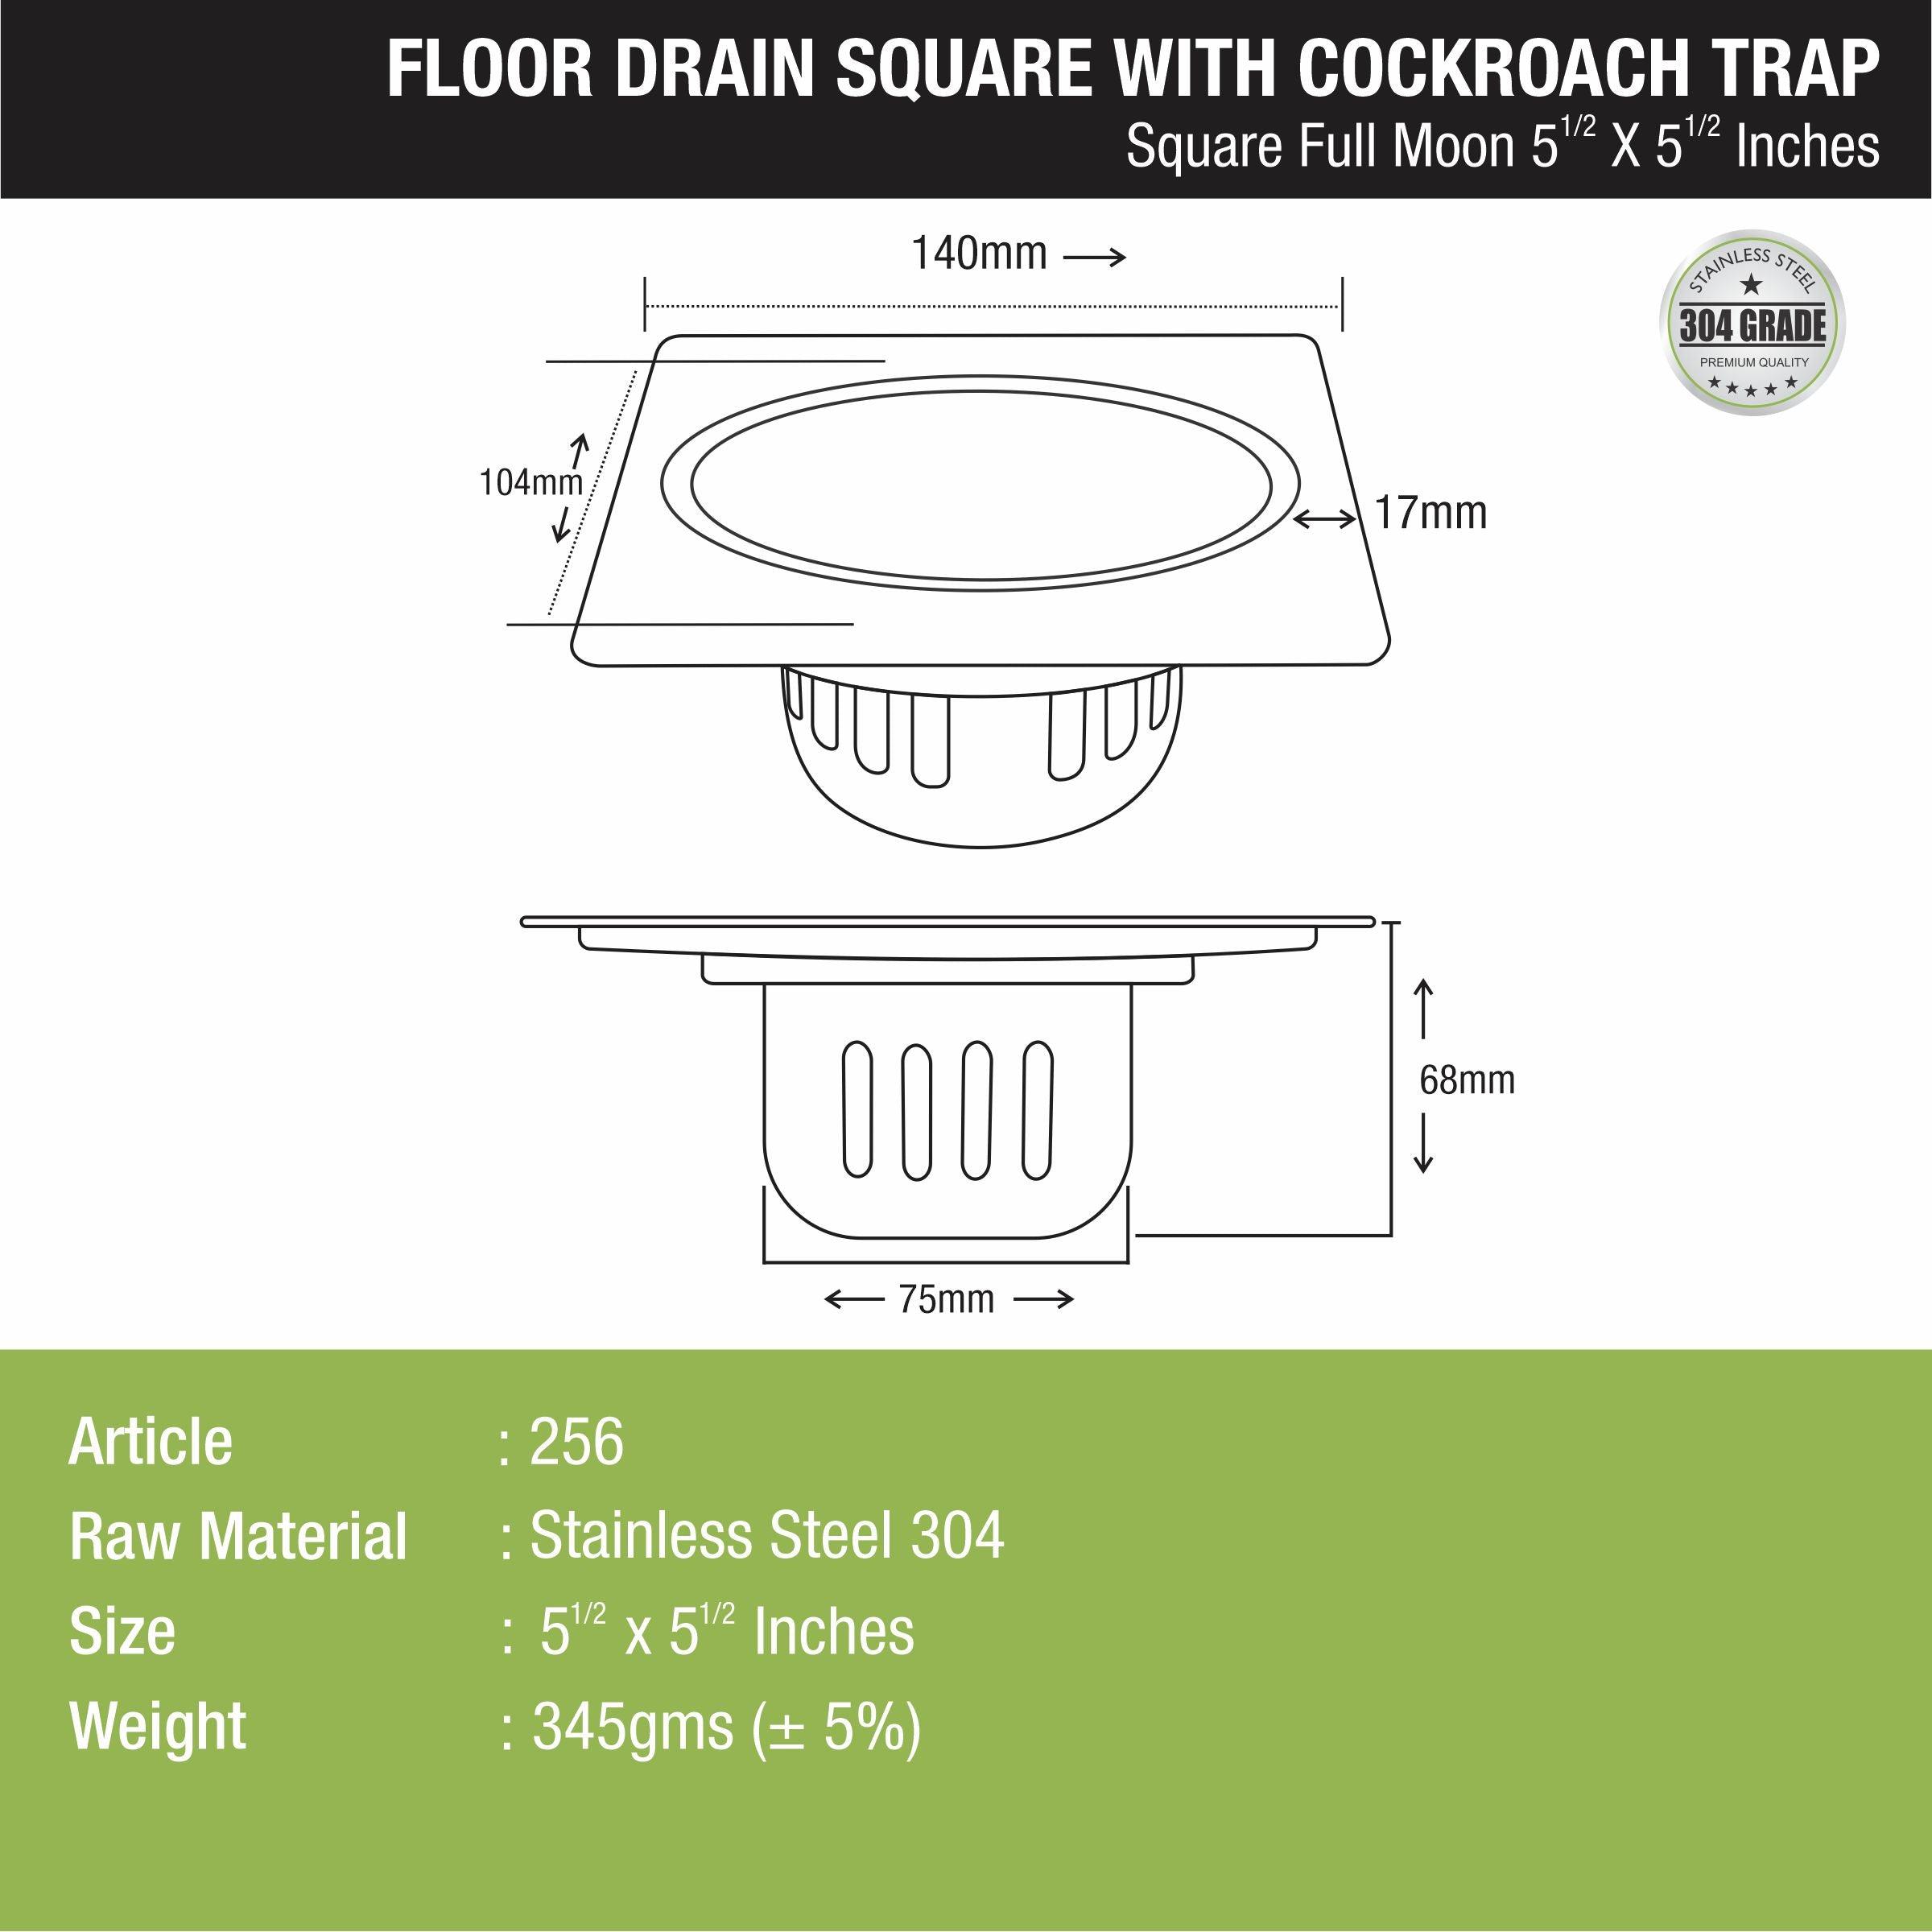 Full Moon Square Floor Drain (5.5 x 5.5 Inches) with Cockroach Trap - LIPKA - Lipka Home